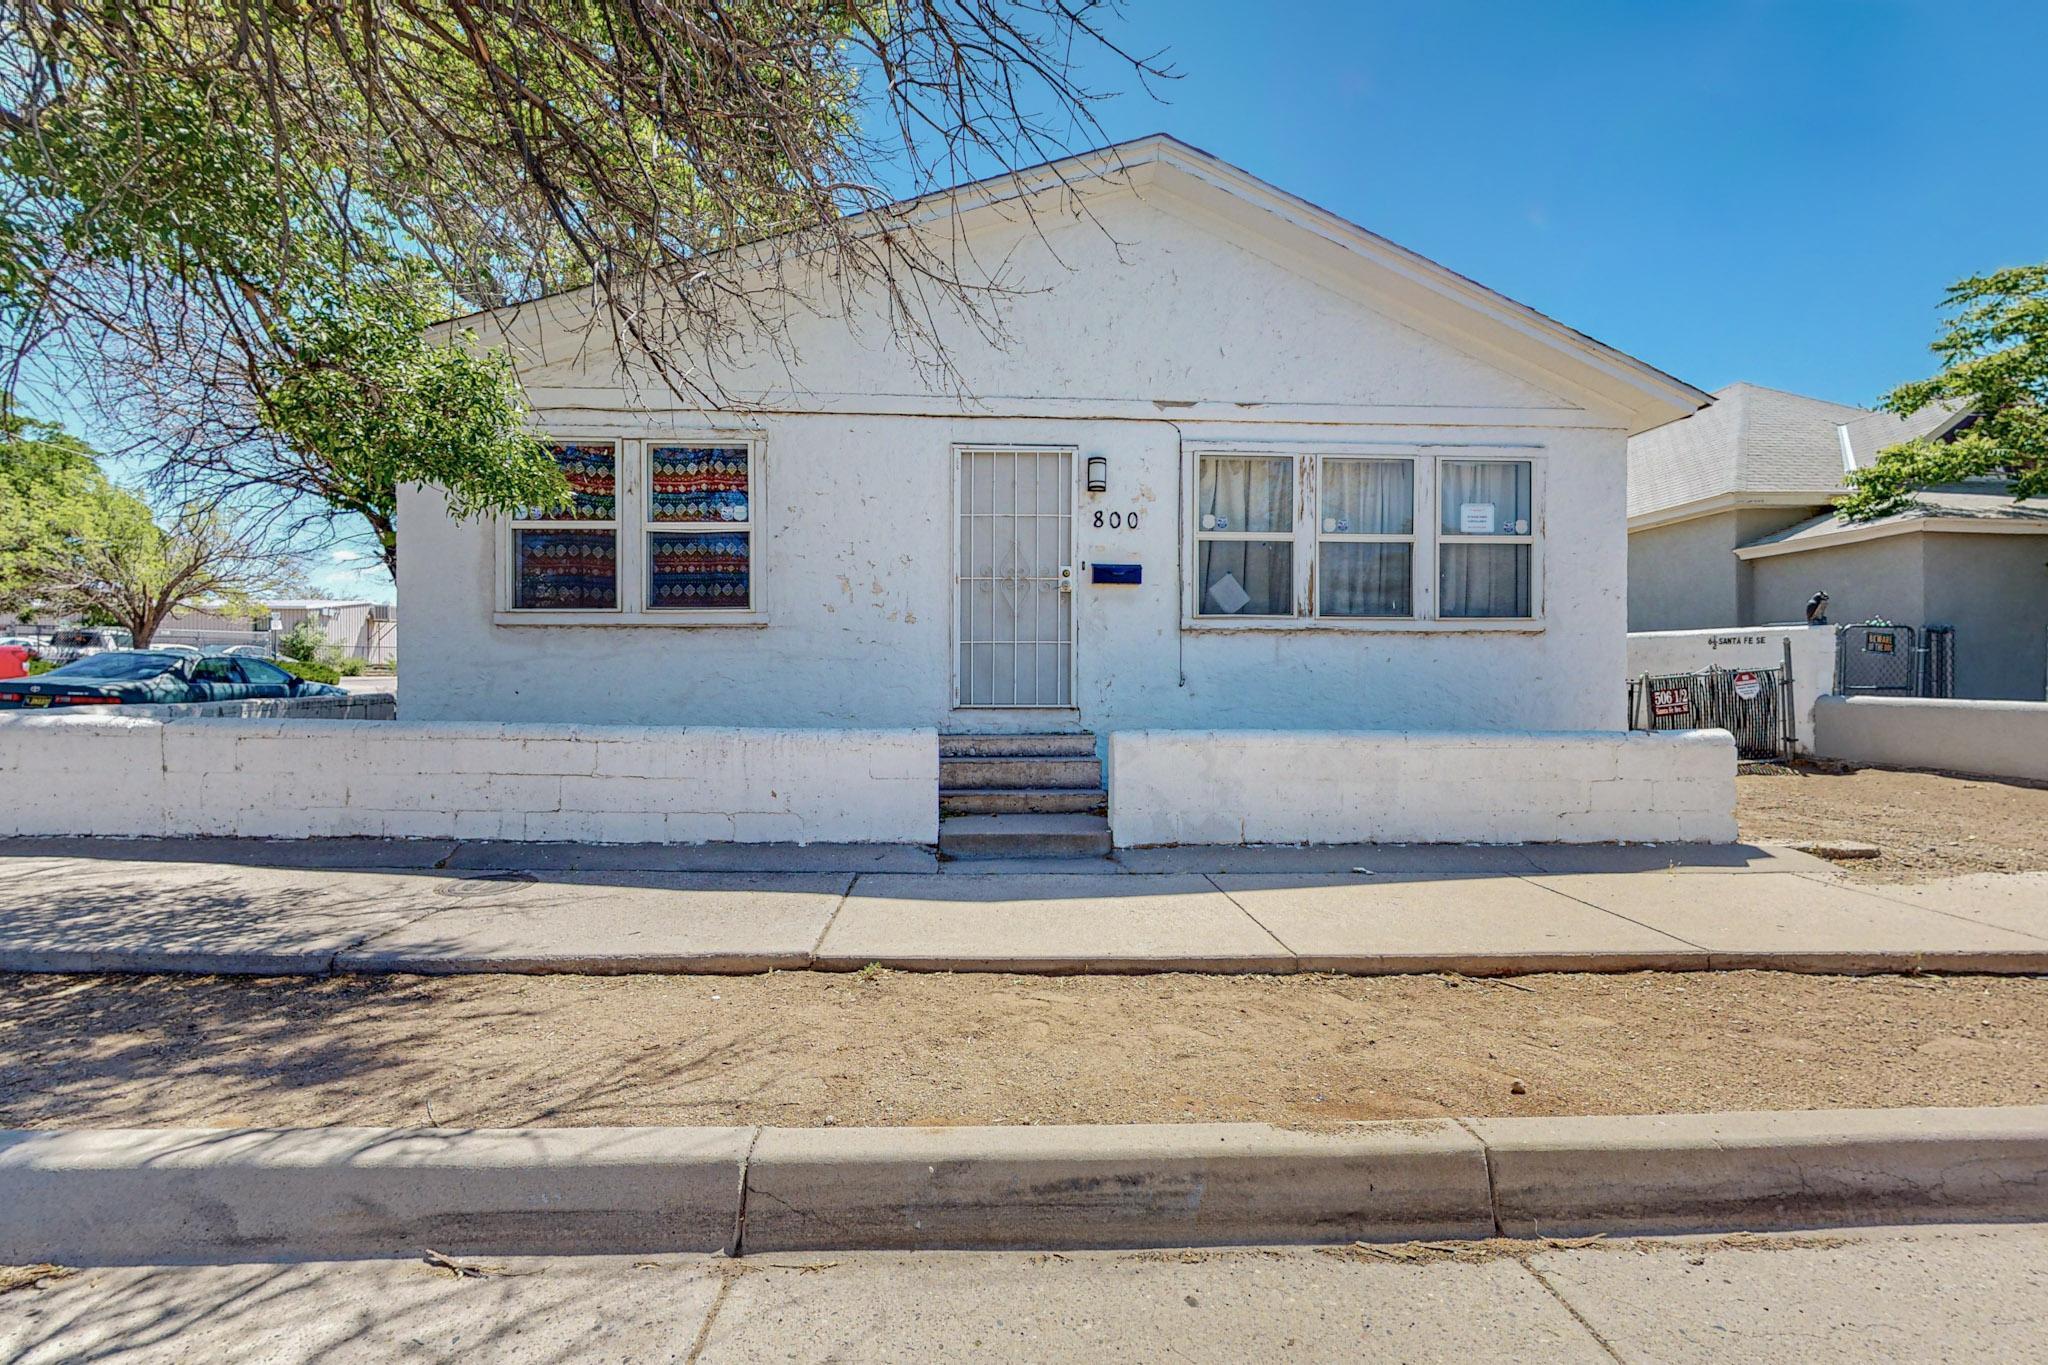 Welcome to a great investment opportunity in the heart of Albuquerque's historic downtown district.  This 4 bedroom 1 bathroom property is positioned on a corner lot.  The property spans a generous layout, ensuring ample space for tenants to live comfortably.  This downtown location and proximity to essential amenities, including schools, and restaurants including public transportation.  This property is more than just a property, it's a chance to own  a piece of Albuquerque's history while securing a reliable income stream.